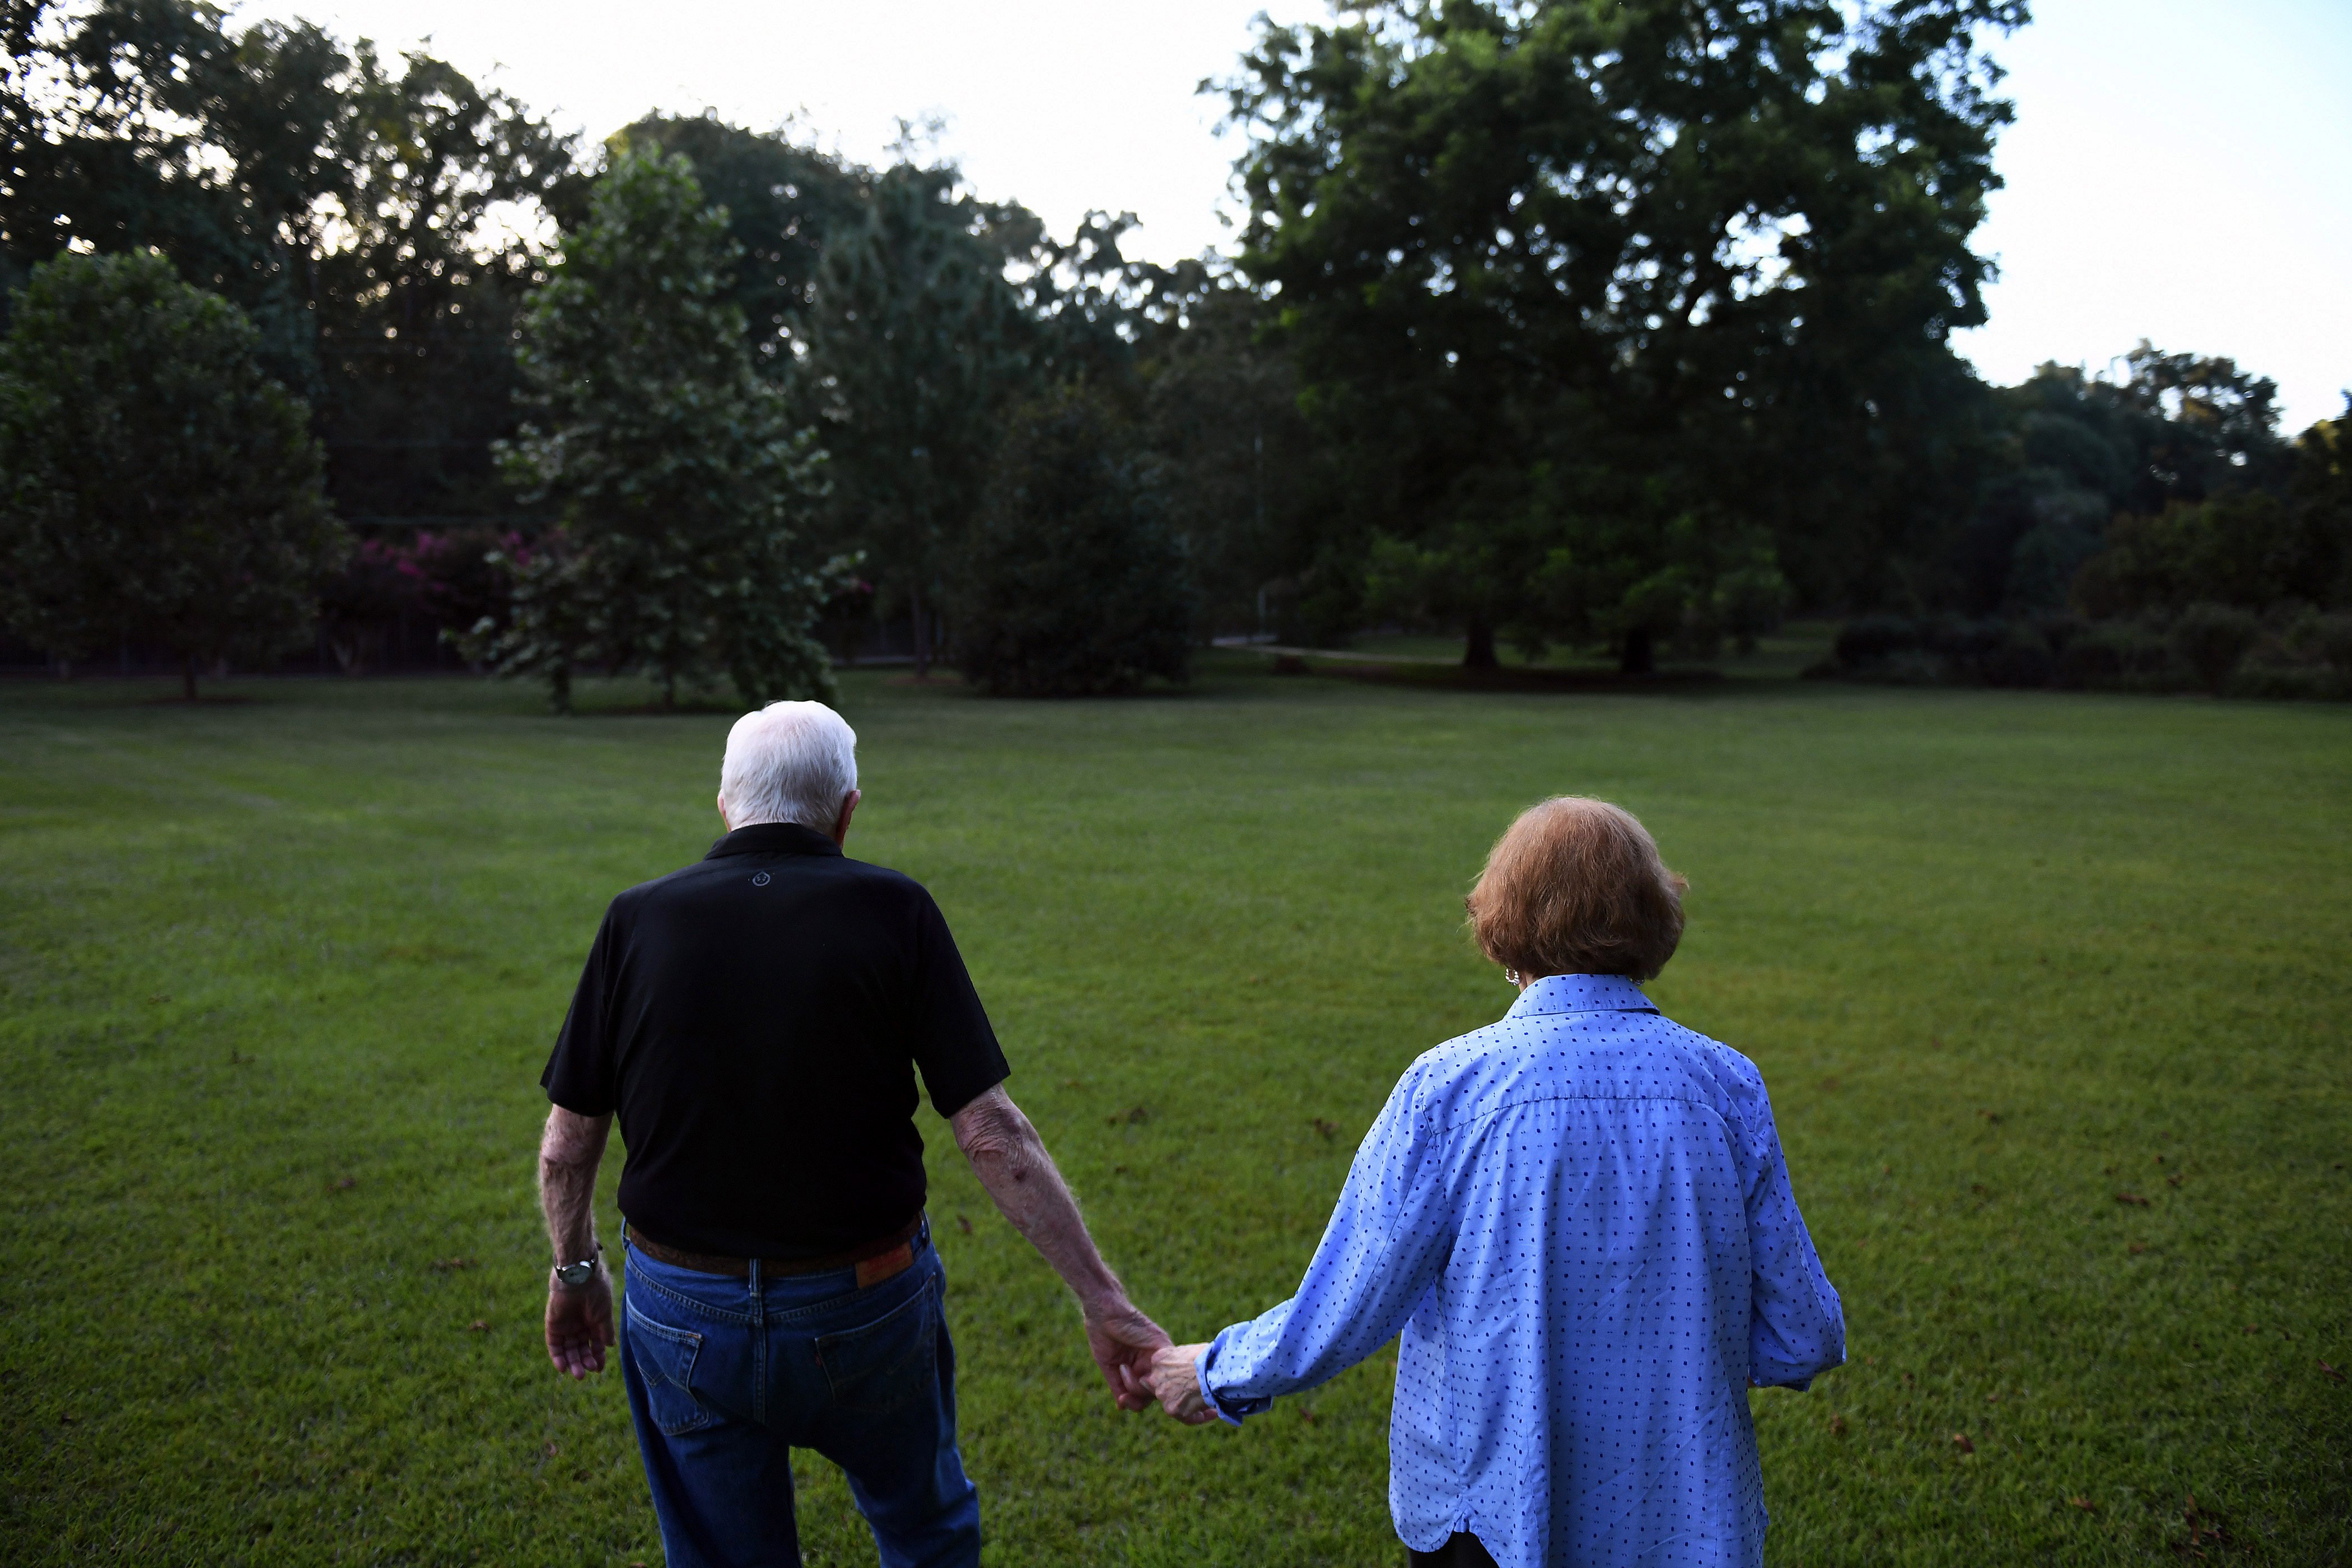 Former President of the United States, Jimmy Carter pictured walking with his wife, former First Lady, Rosalynn Carter towards their home on Saturday August 4, 2018 in Plains, Georgia ┃Source: Getty Images